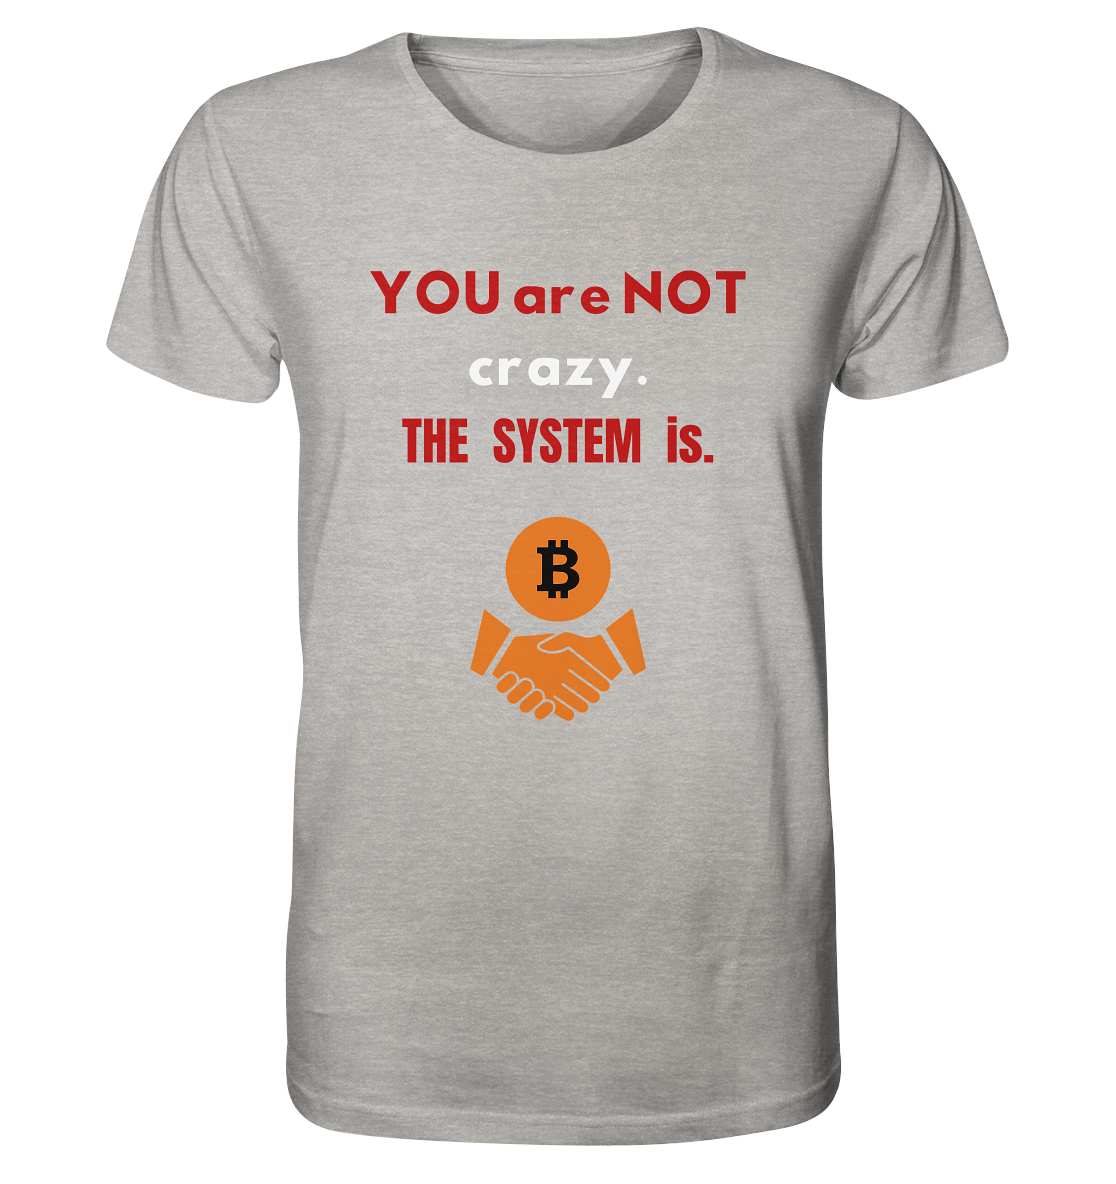 YOU are NOT crazy. THE SYSTEM is. (Variante BTC black) - Organic Shirt (meliert)